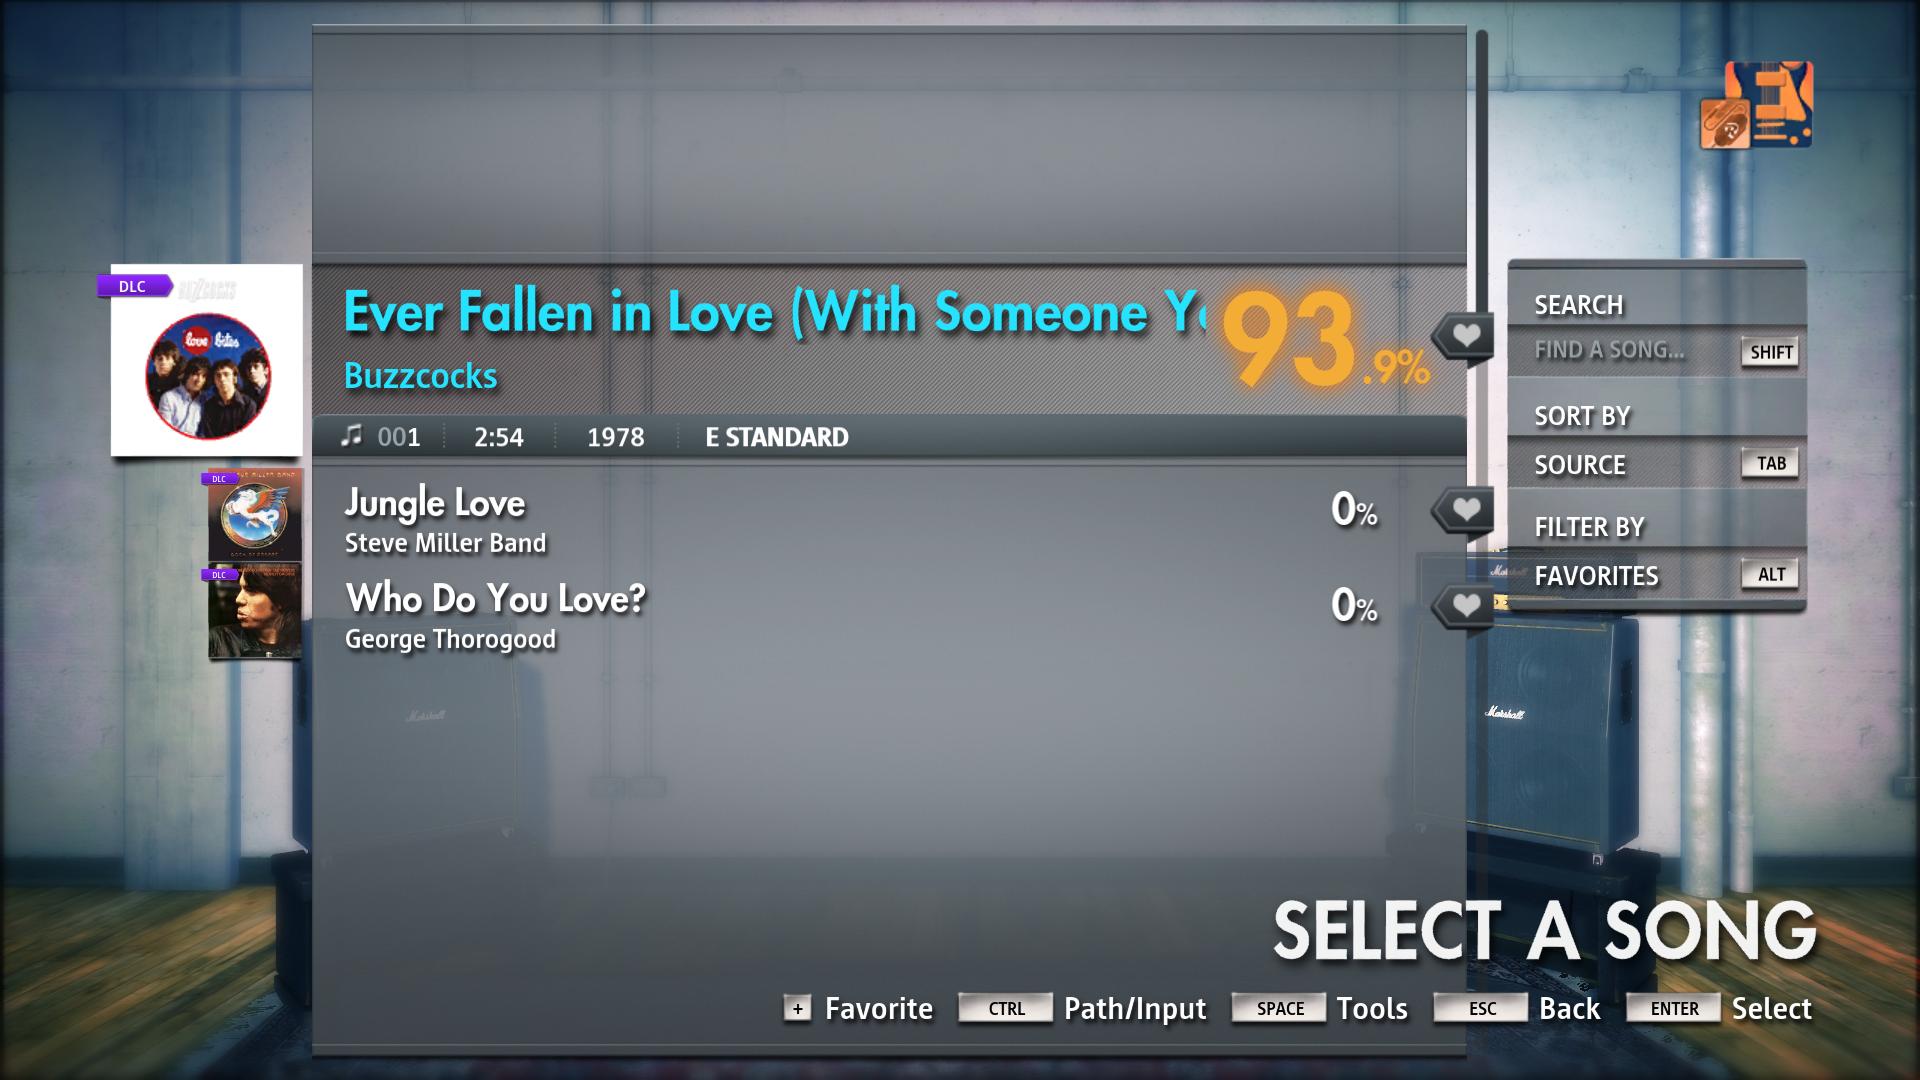 Rocksmith® 2014 Edition – Remastered – Buzzcocks - “Ever Fallen in Love (With Someone You Shouldn’t’ve)” Featured Screenshot #1